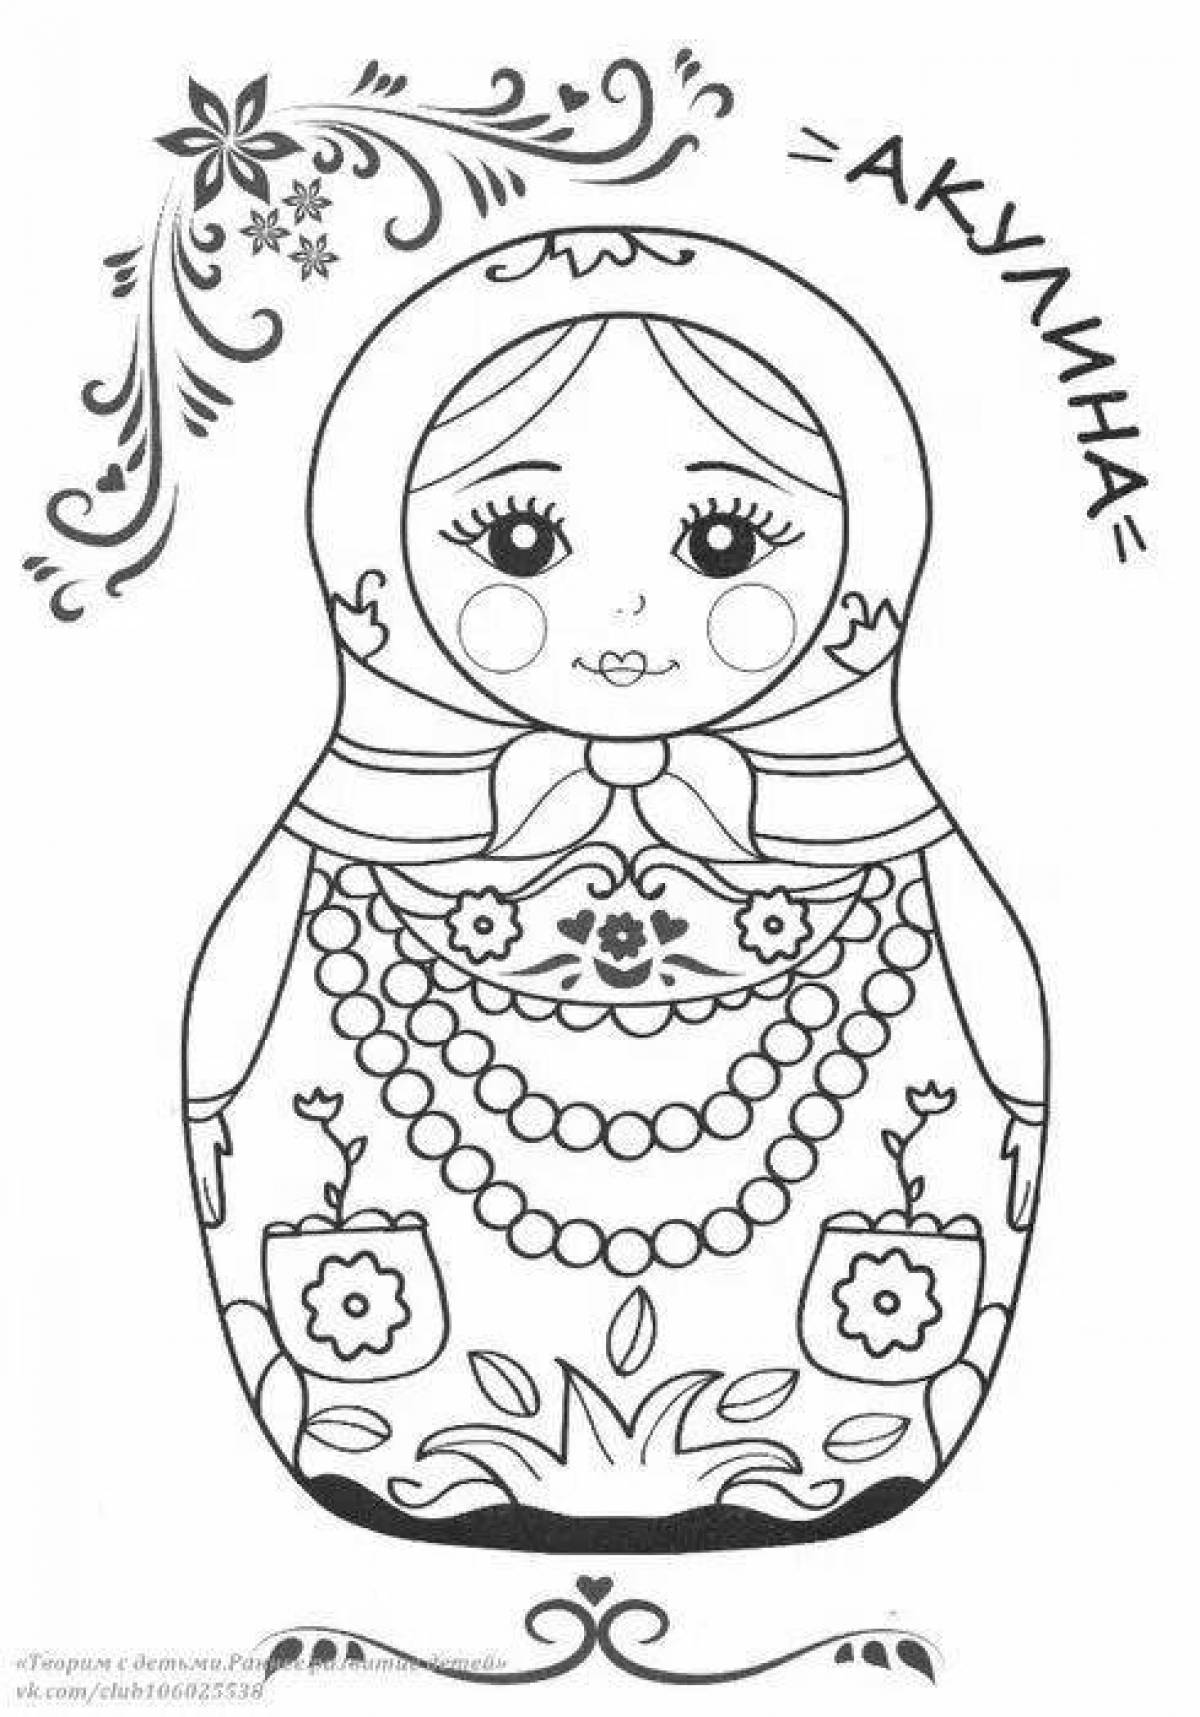 Colorful matryoshka picture for kids